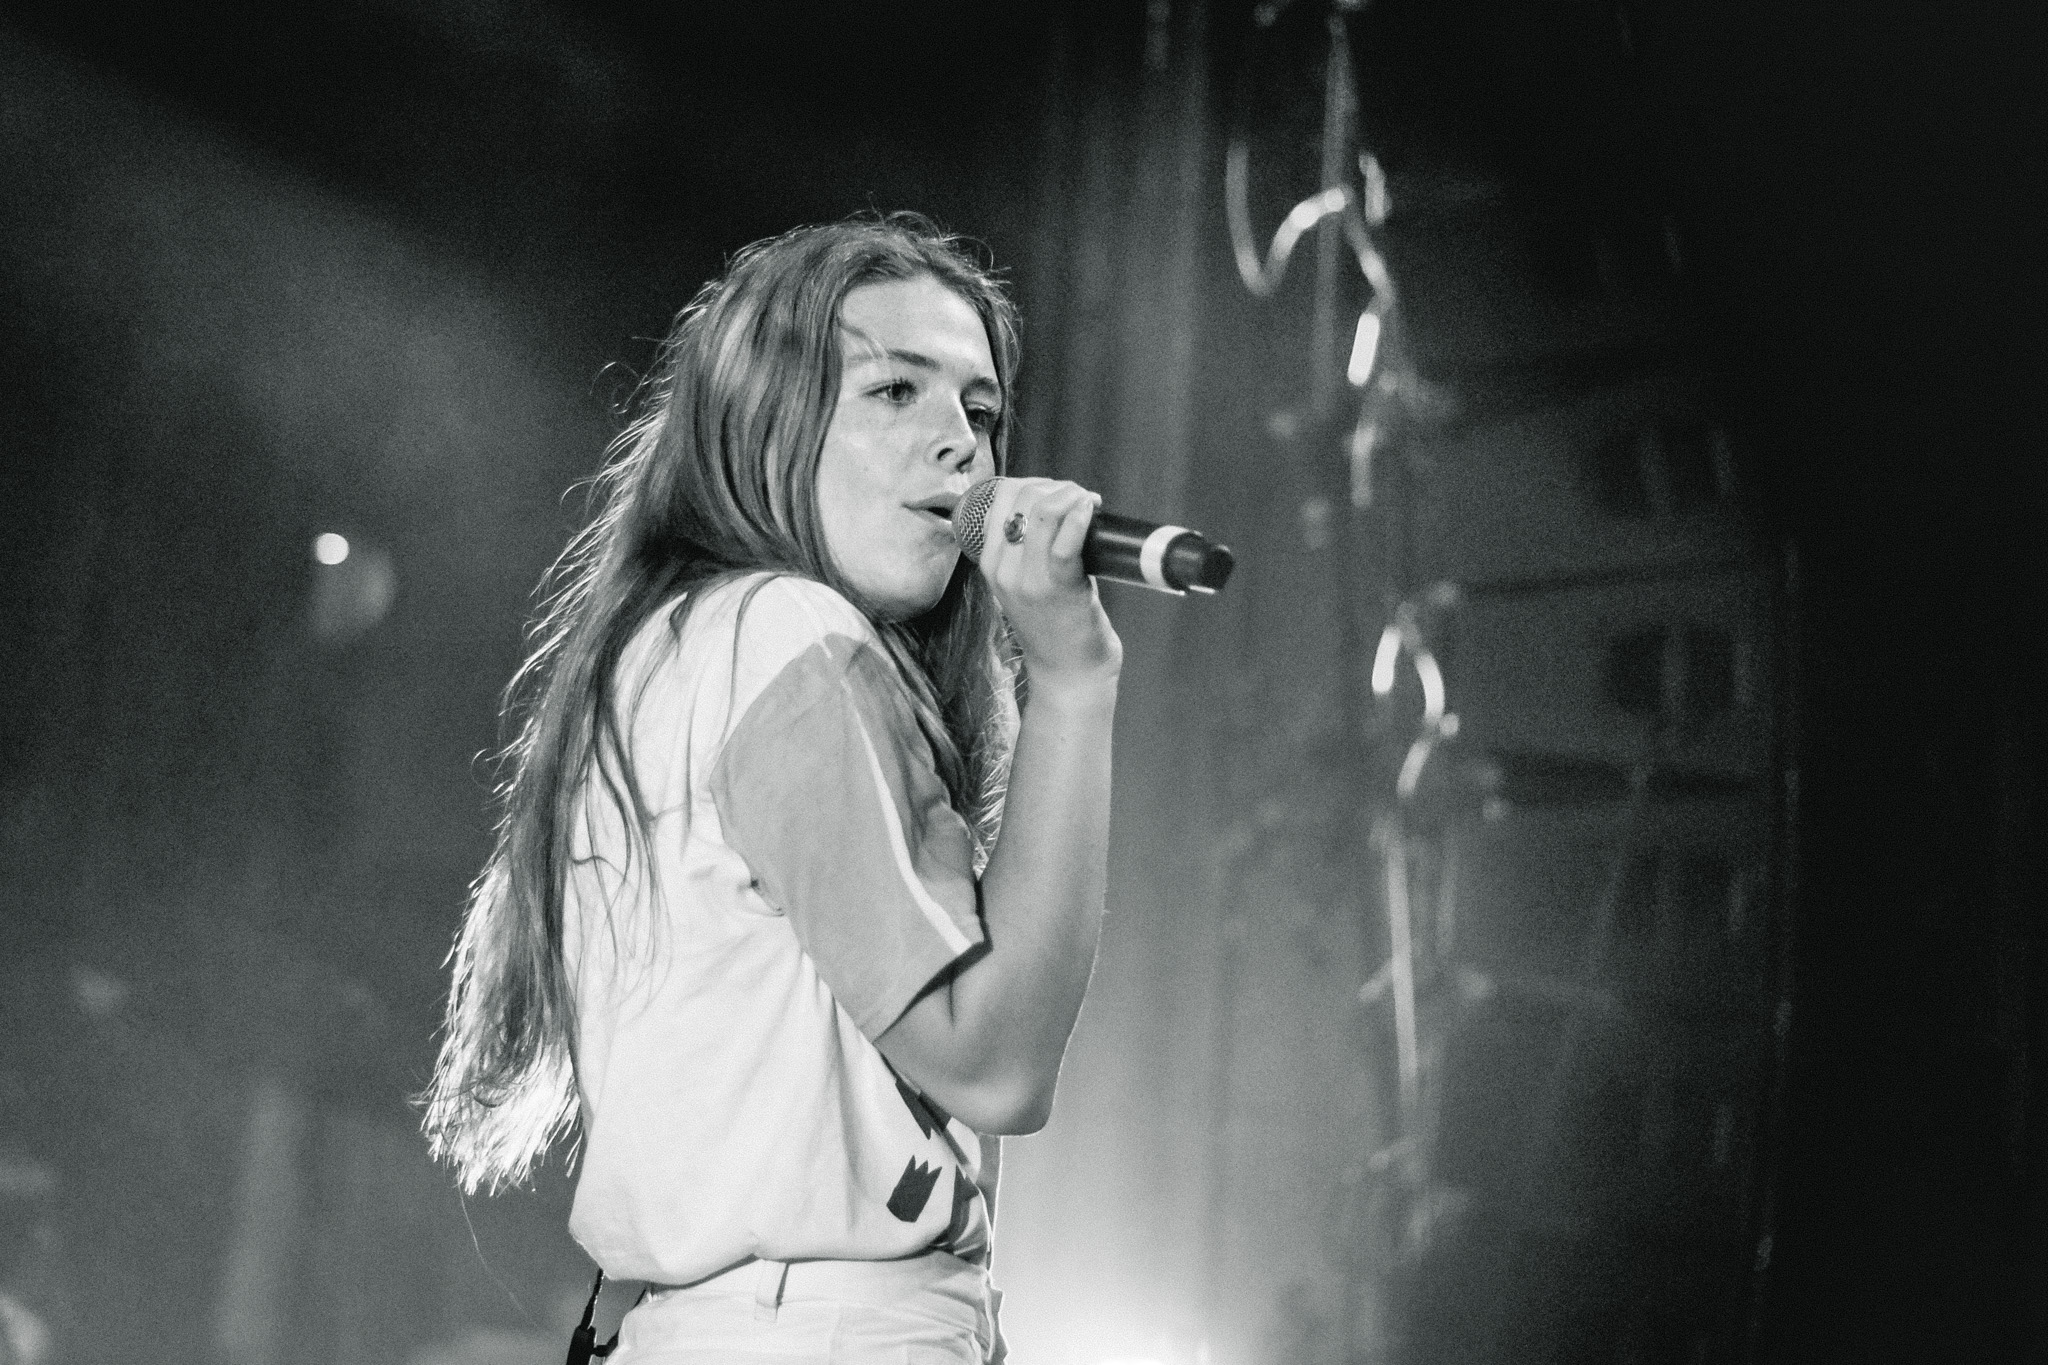 Maggie Rogers at The Riviera Theatre Chicago